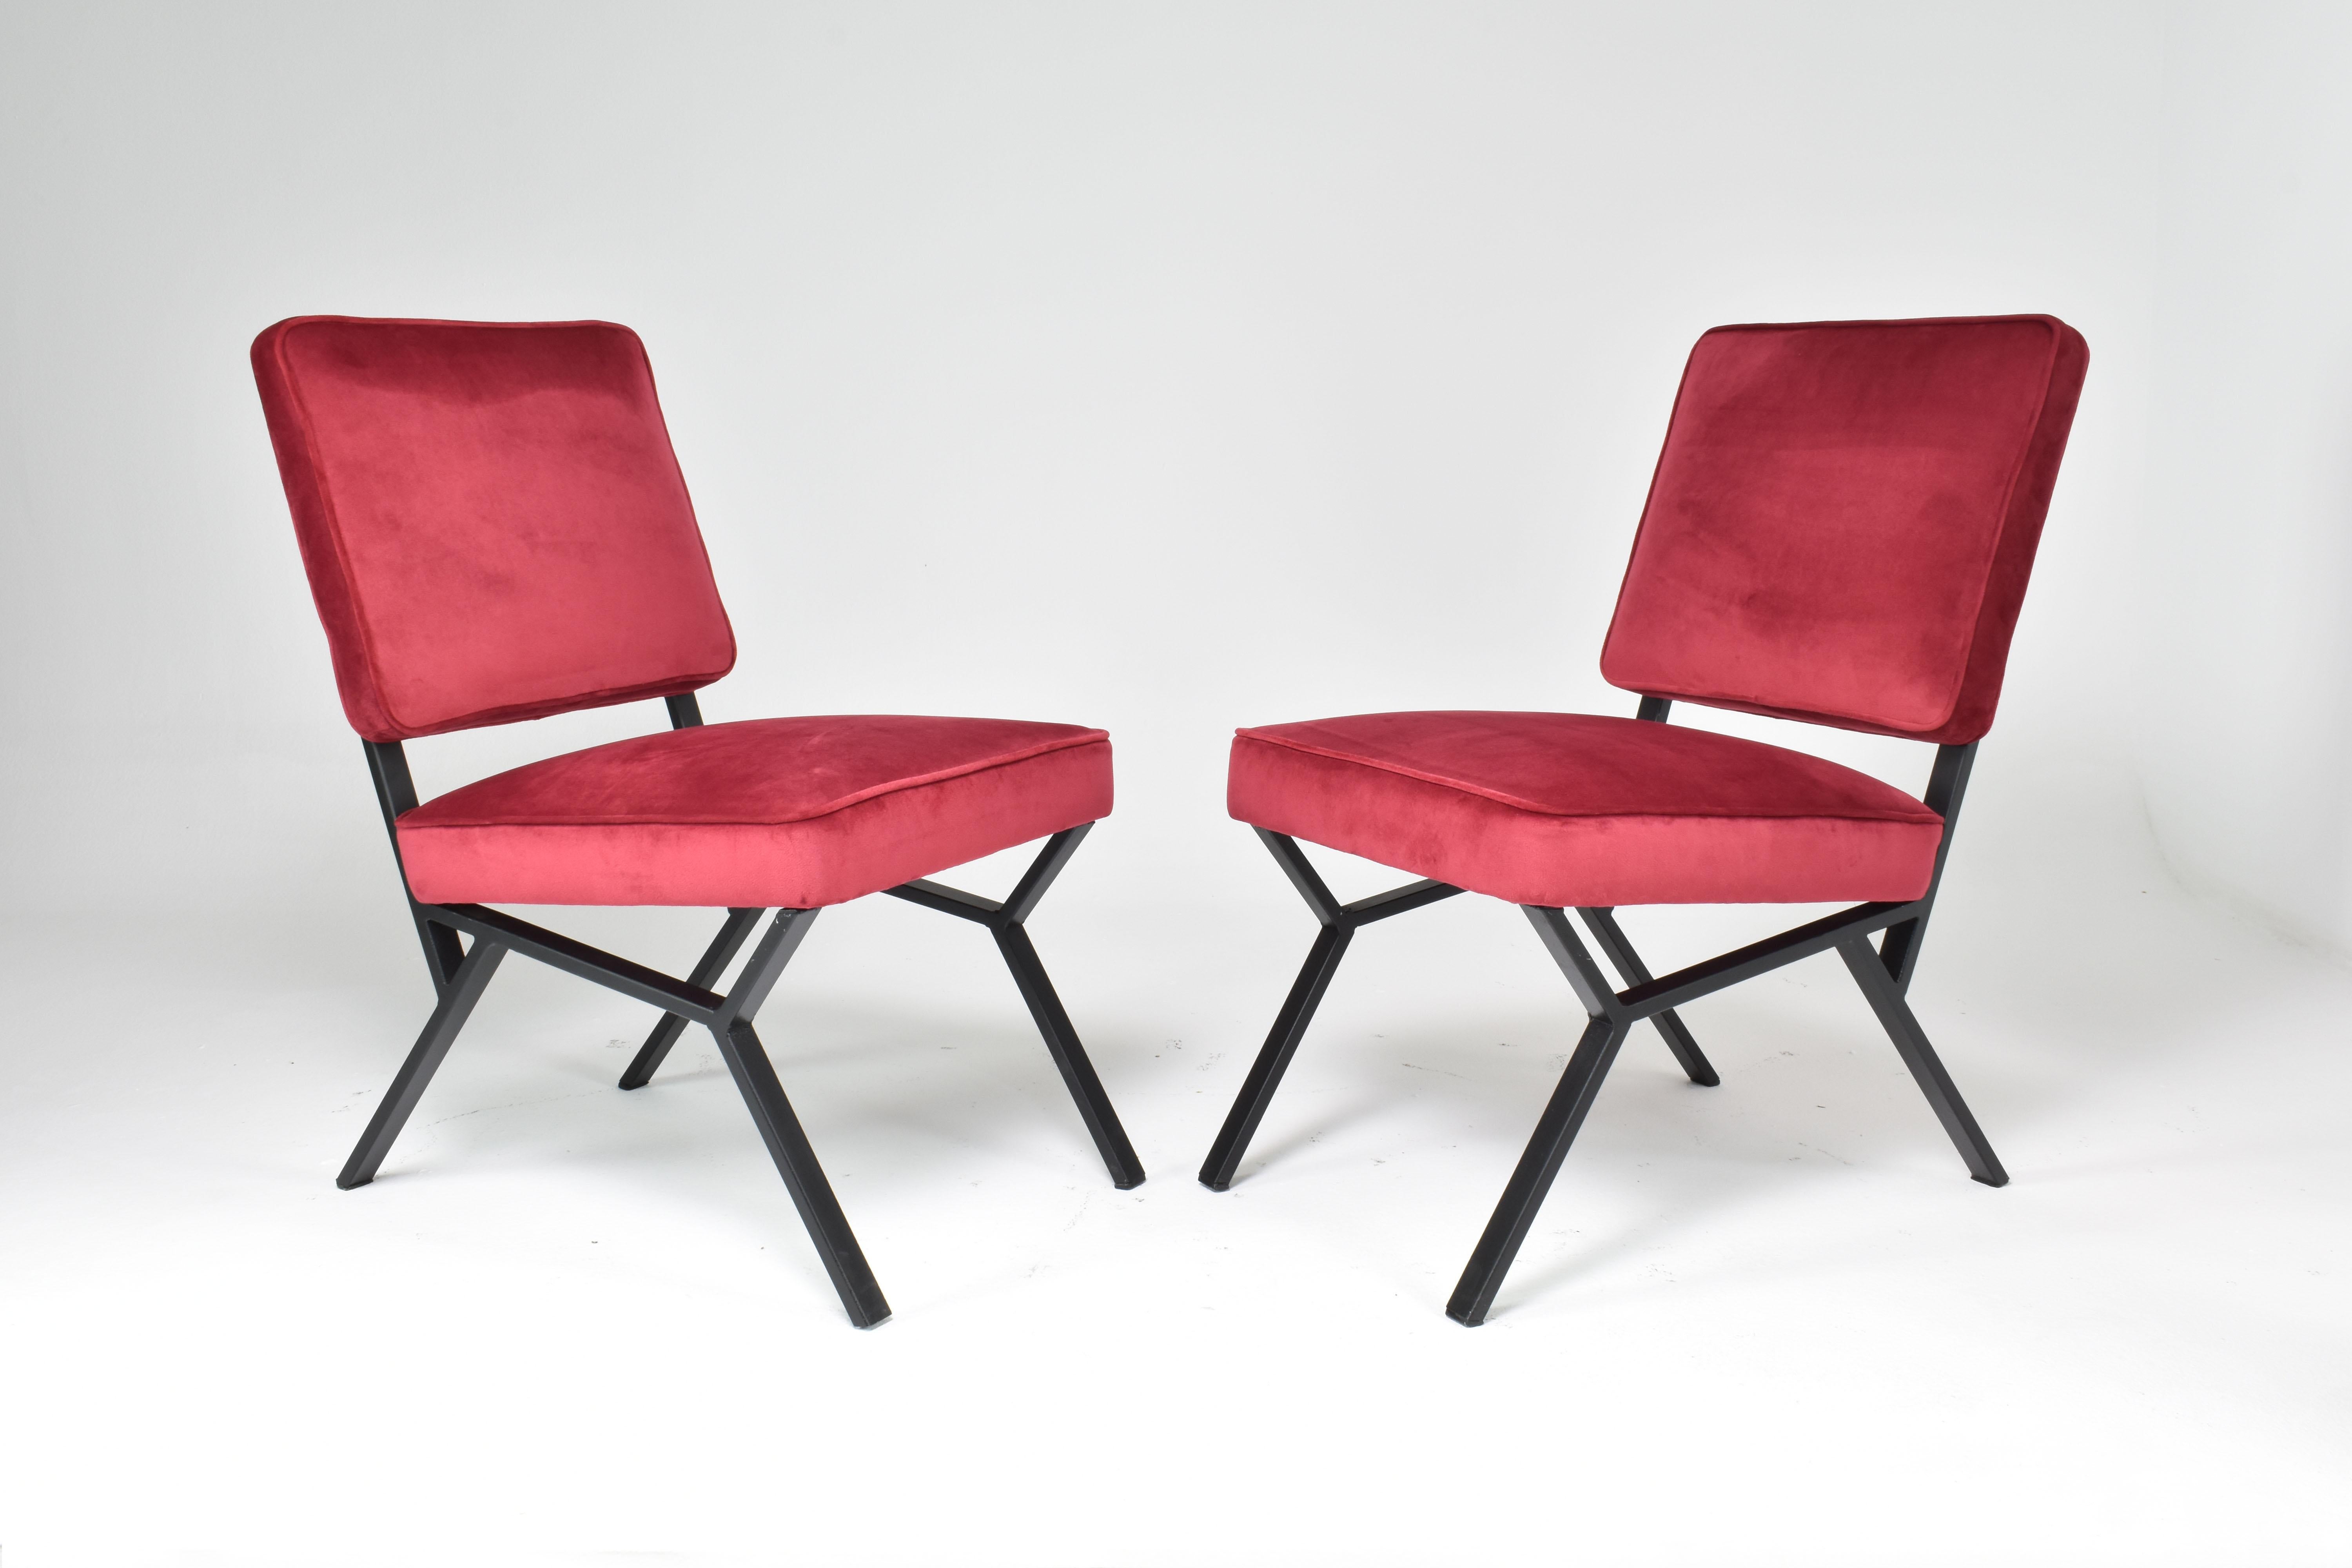 A pair of mid-century modern Italian chairs designed by Giancarlo Bovini and composed of metal and fully restored at our atelier in a bright new red upholstery. 
The design is well-proportioned for optimal comfort and durability. 
Styling red